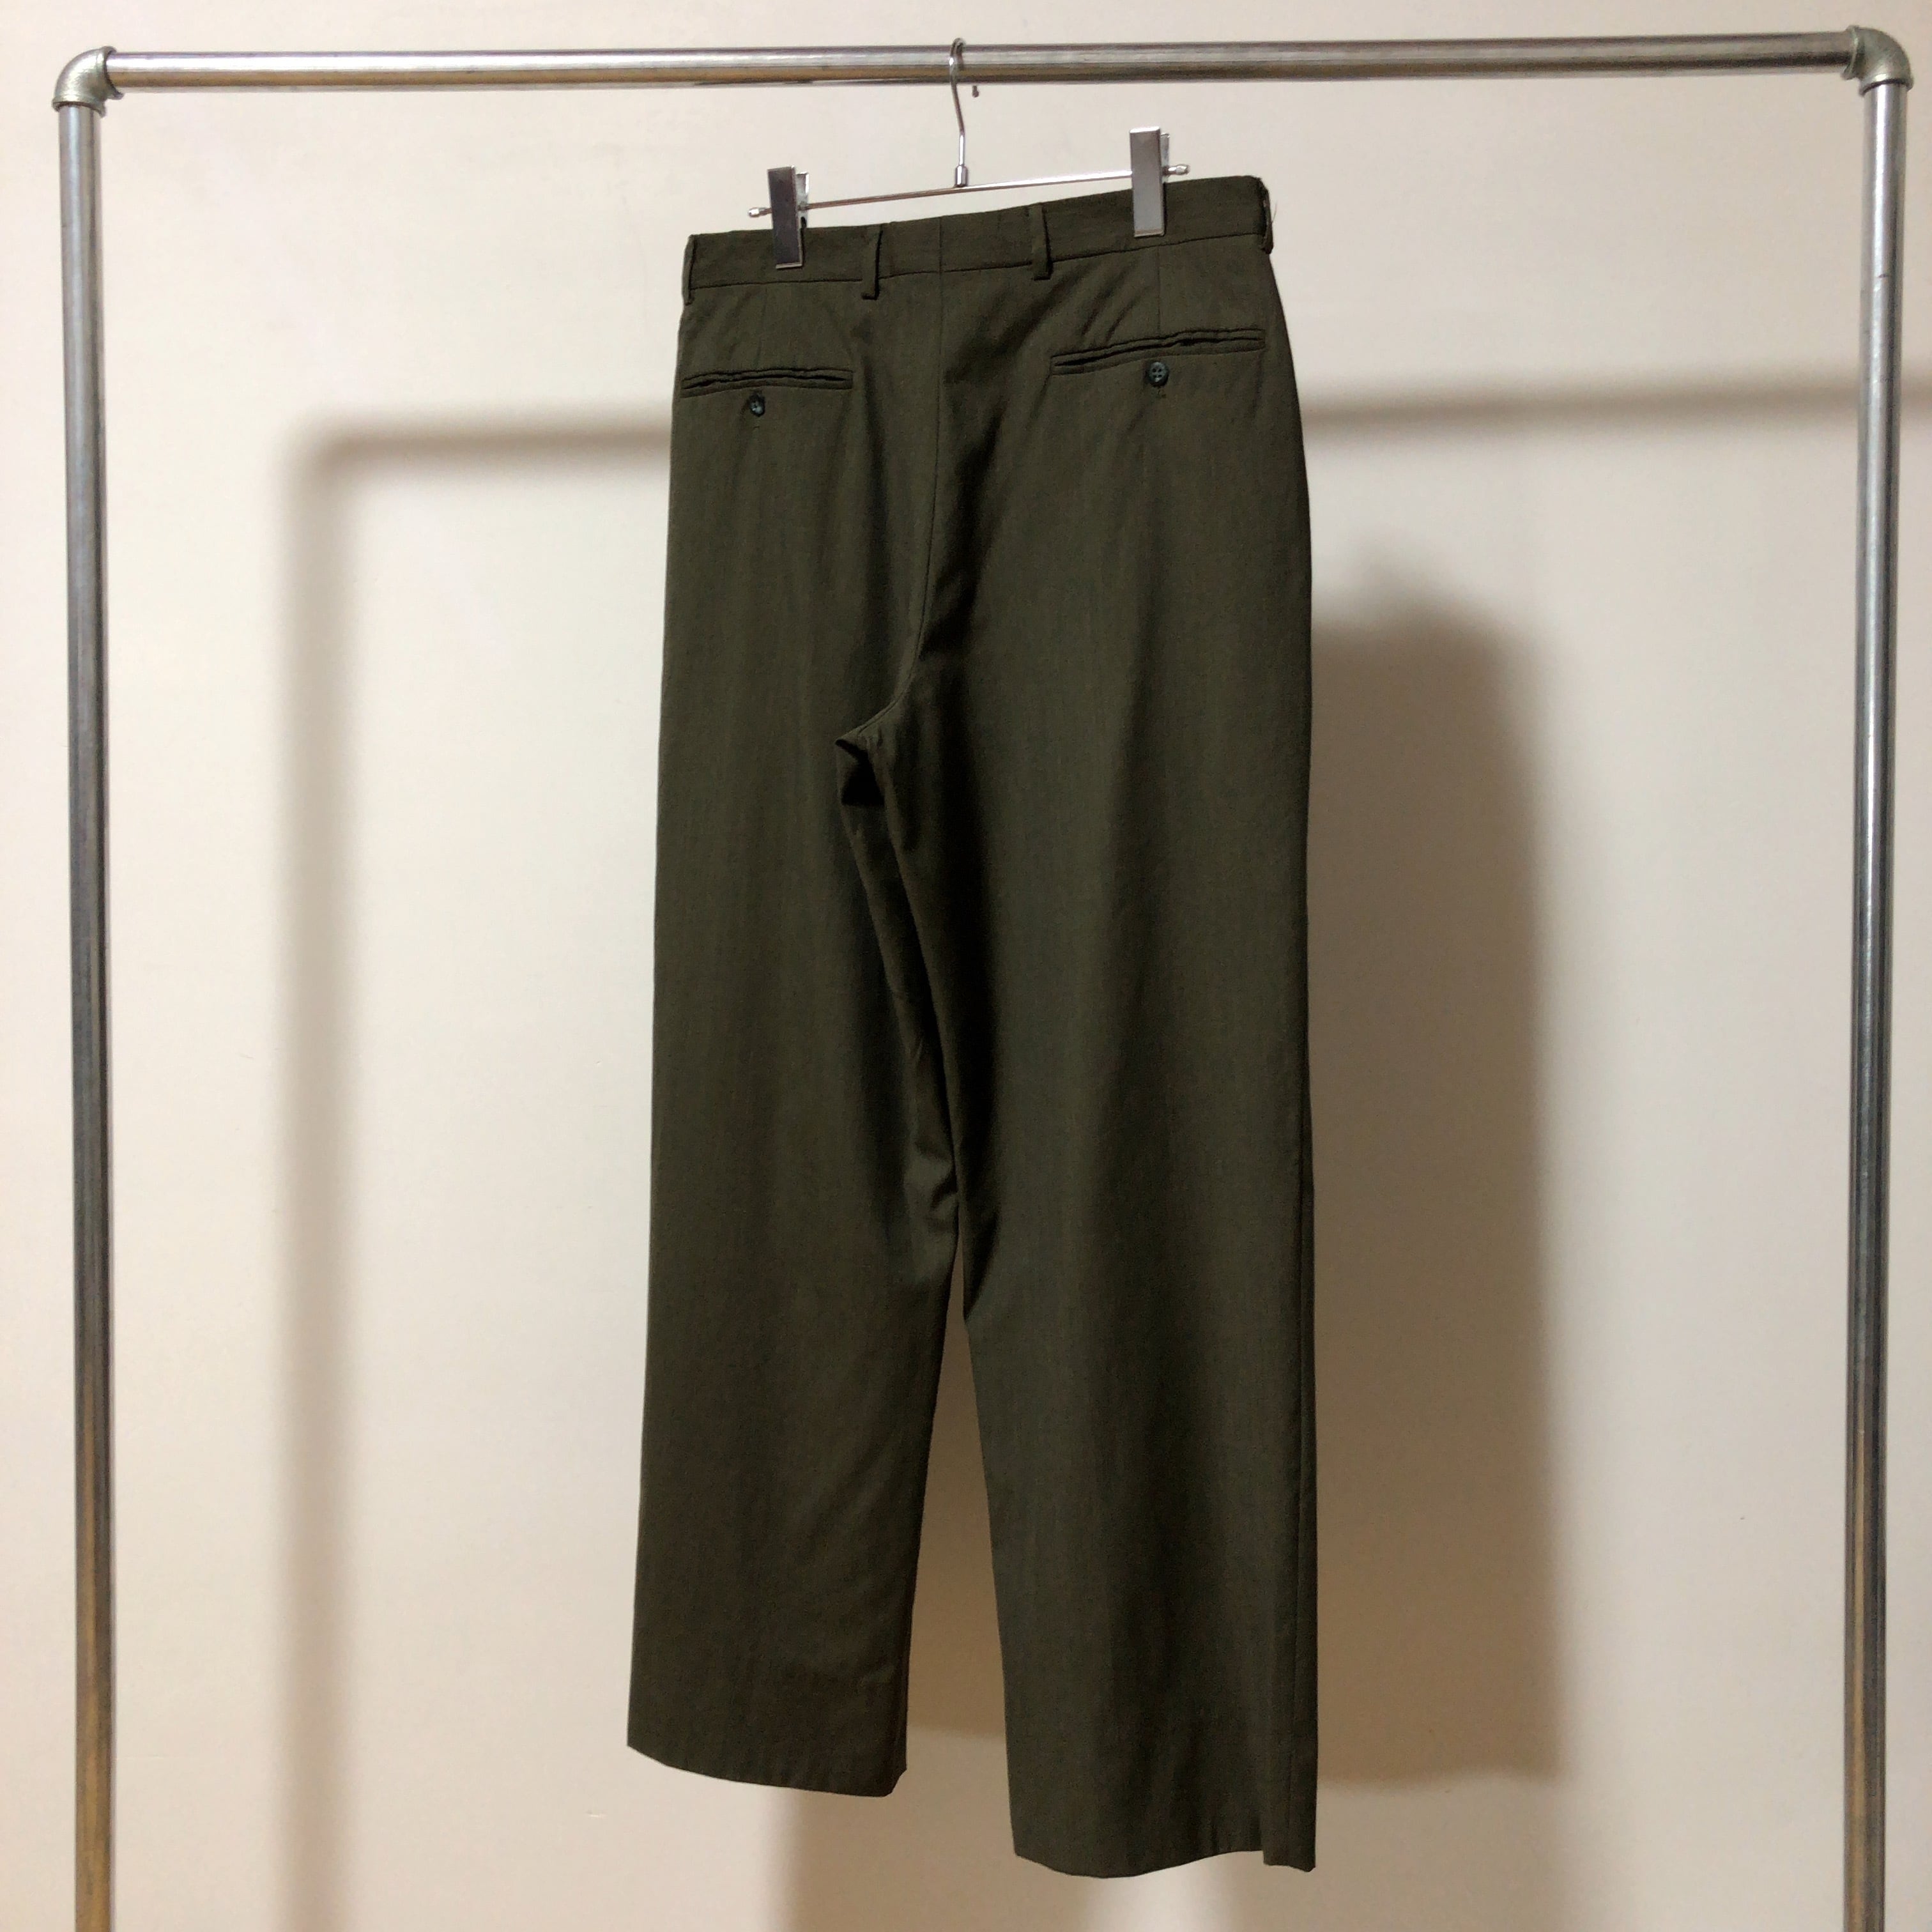 GIORGIO ARMANI / 80's Vintage 2tuck Wool Trousers / Made in Itary ...